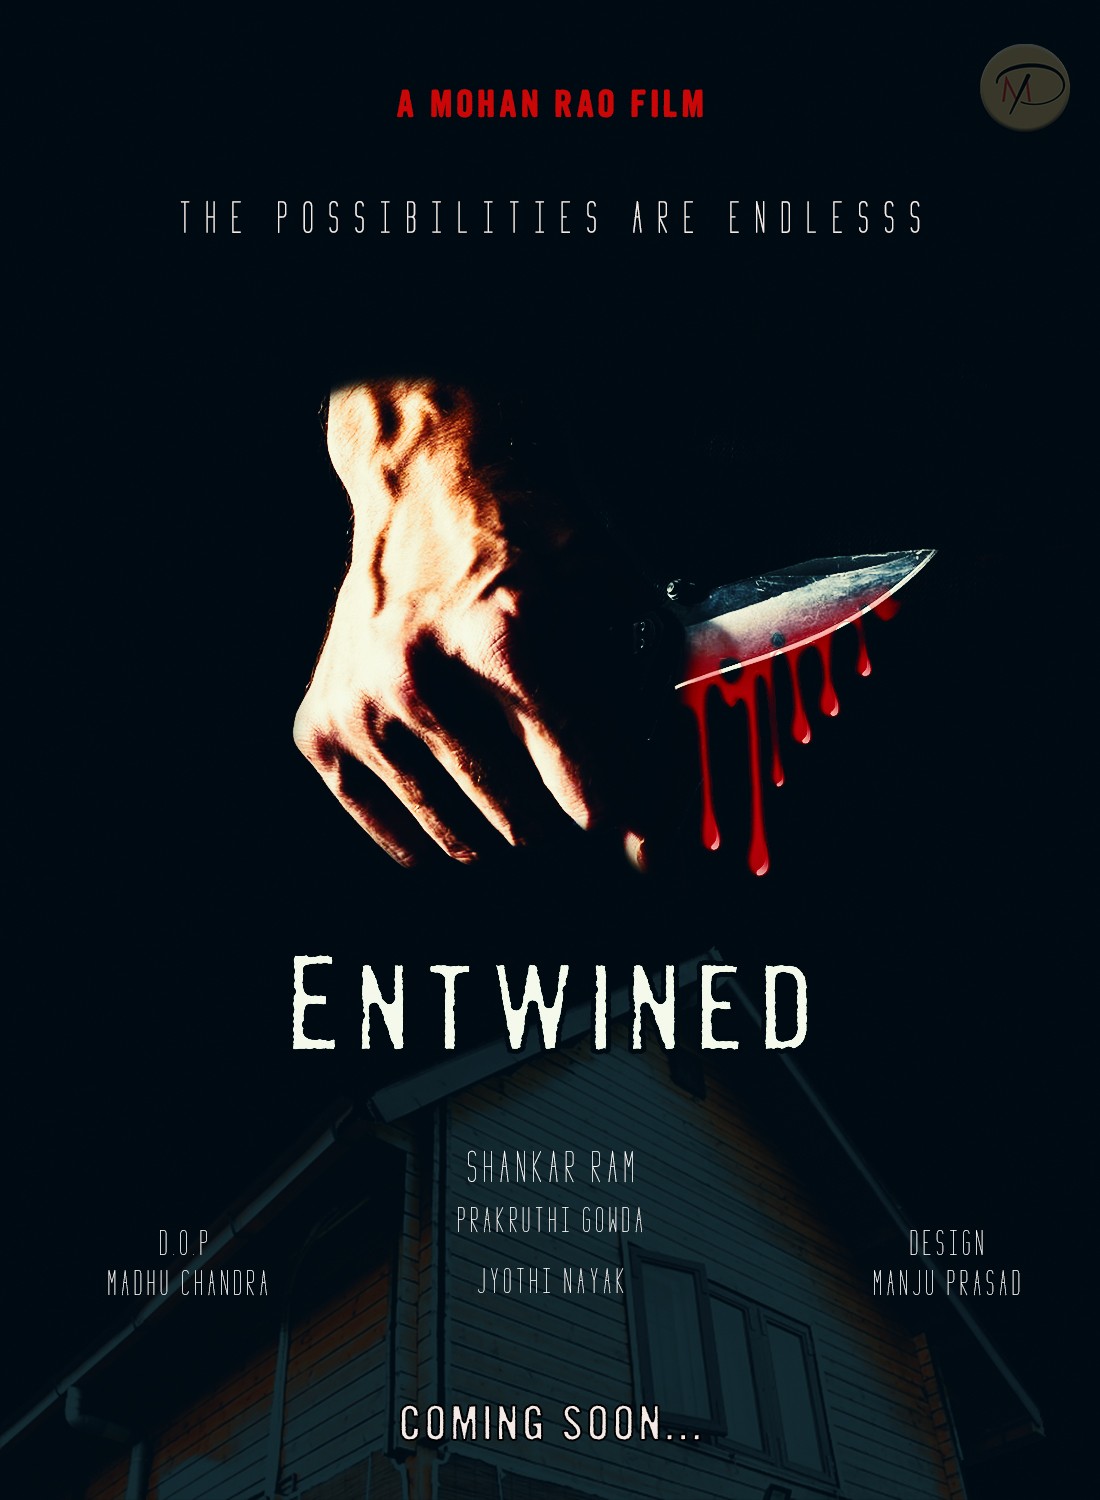 Extra Large Movie Poster Image for Entwined - The possibilities are endless